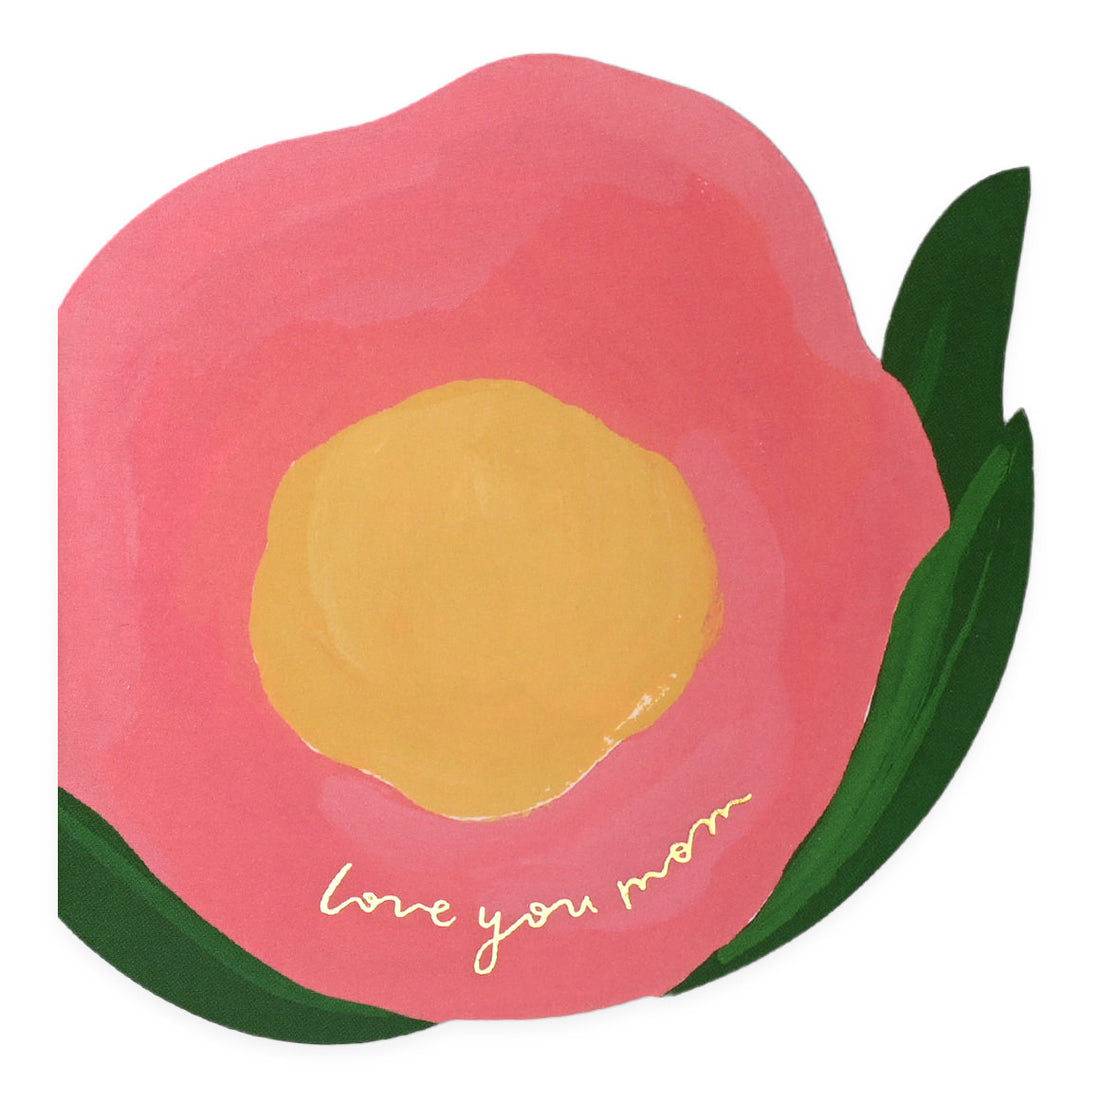 Our Heiday Poppy Love You Mom Mother's Day Card 